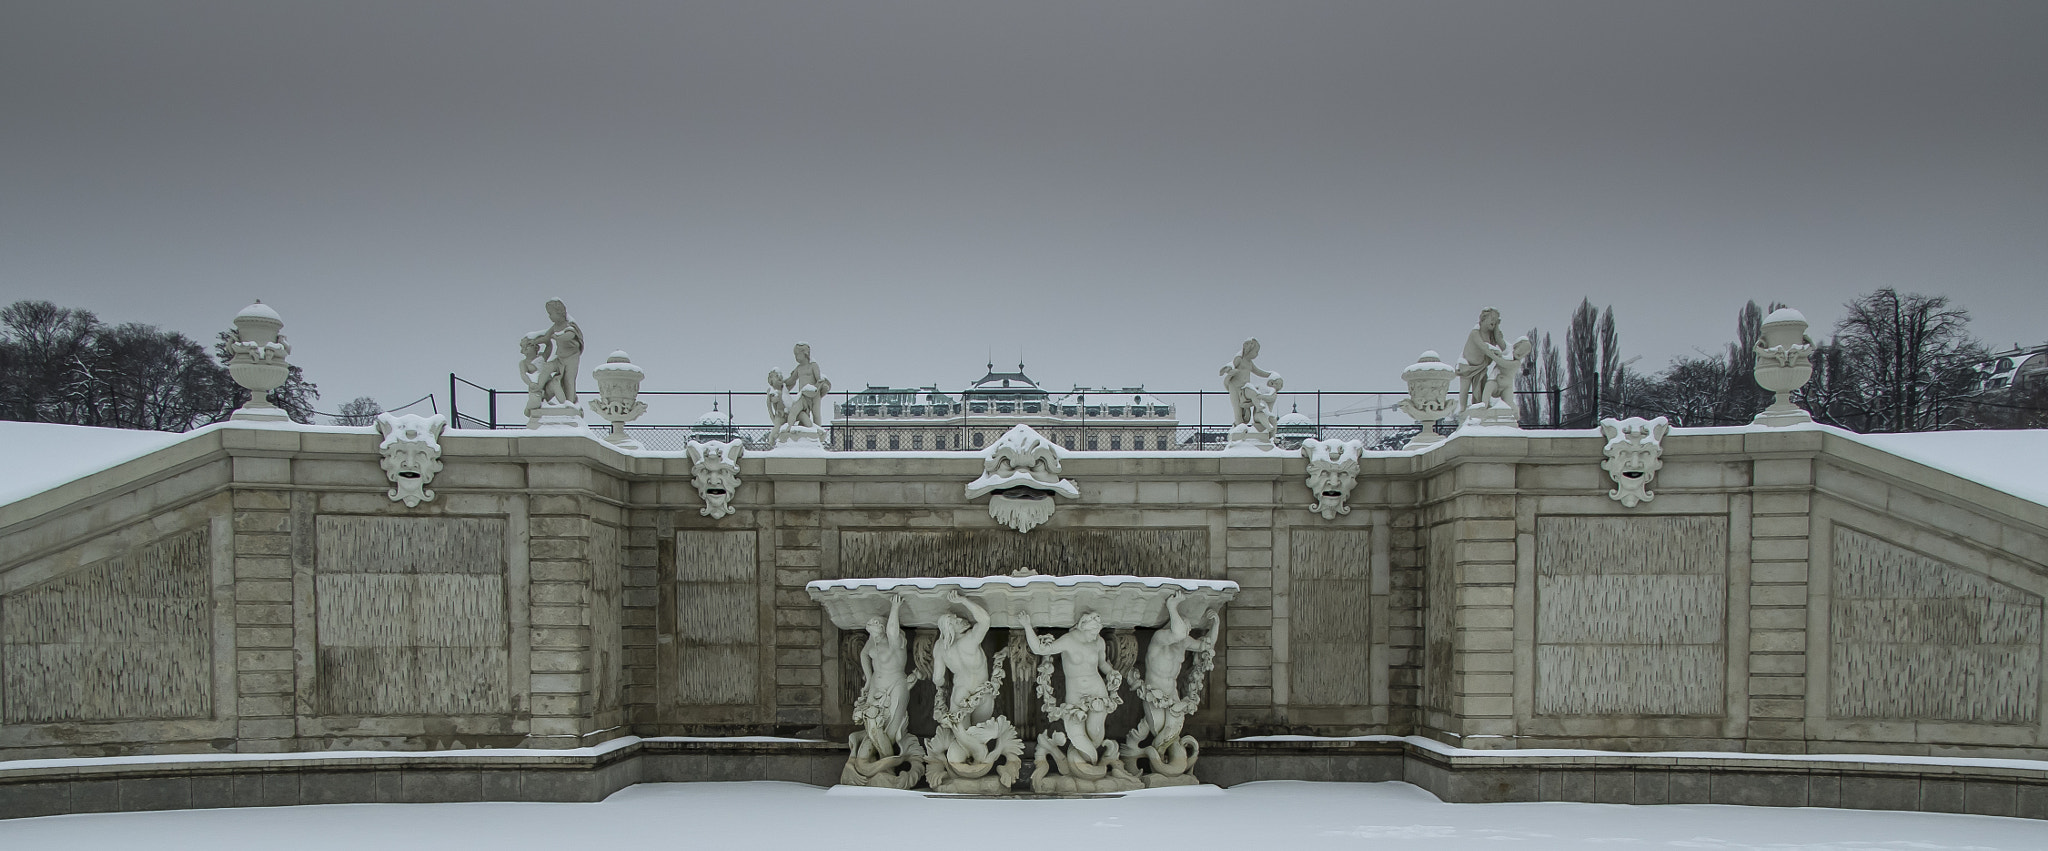 Tamron 14-150mm F3.5-5.8 Di III sample photo. Fountain belvedere palace vienna photography